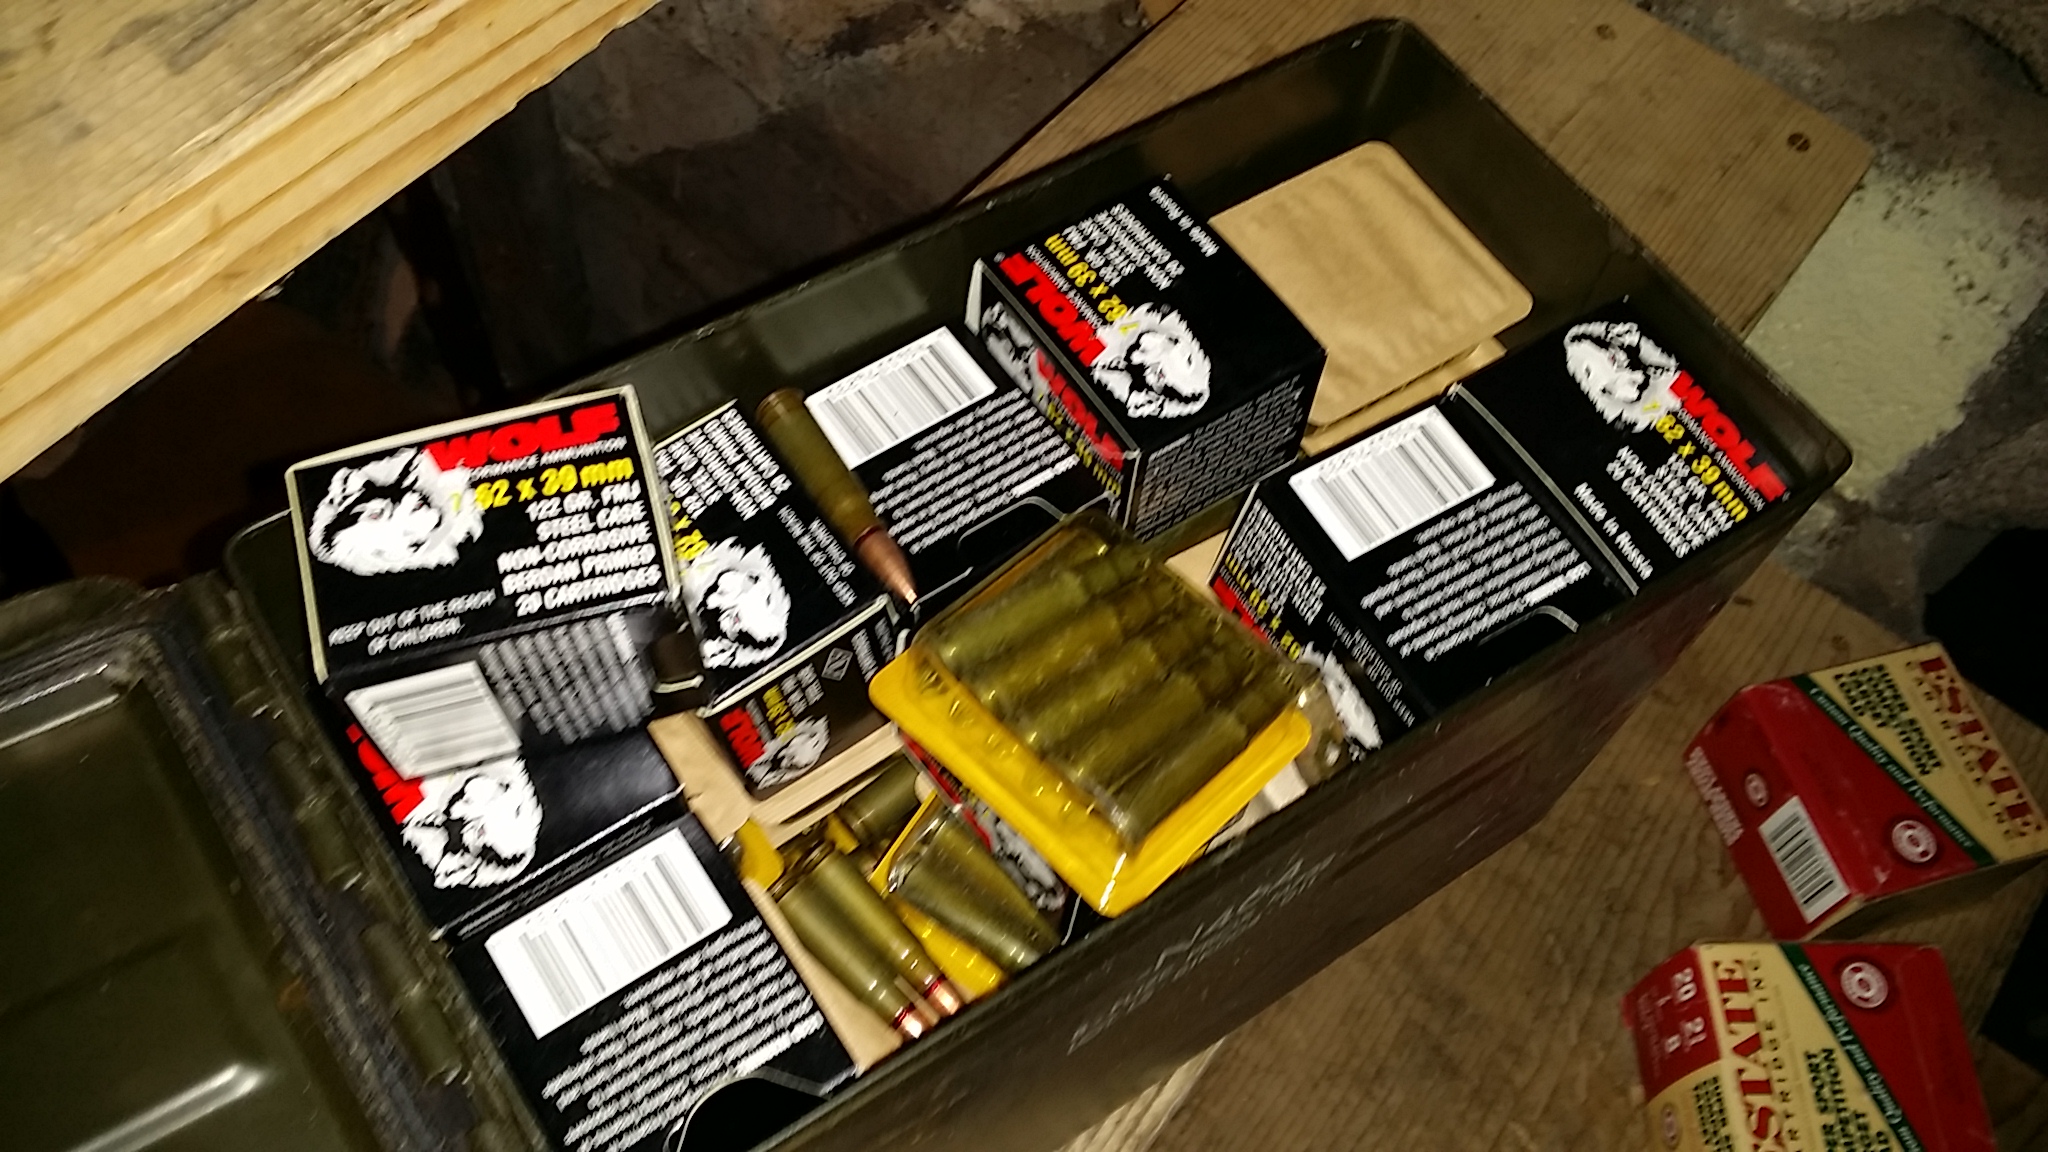 What do you need this much ammo for? Preparations for zombies?